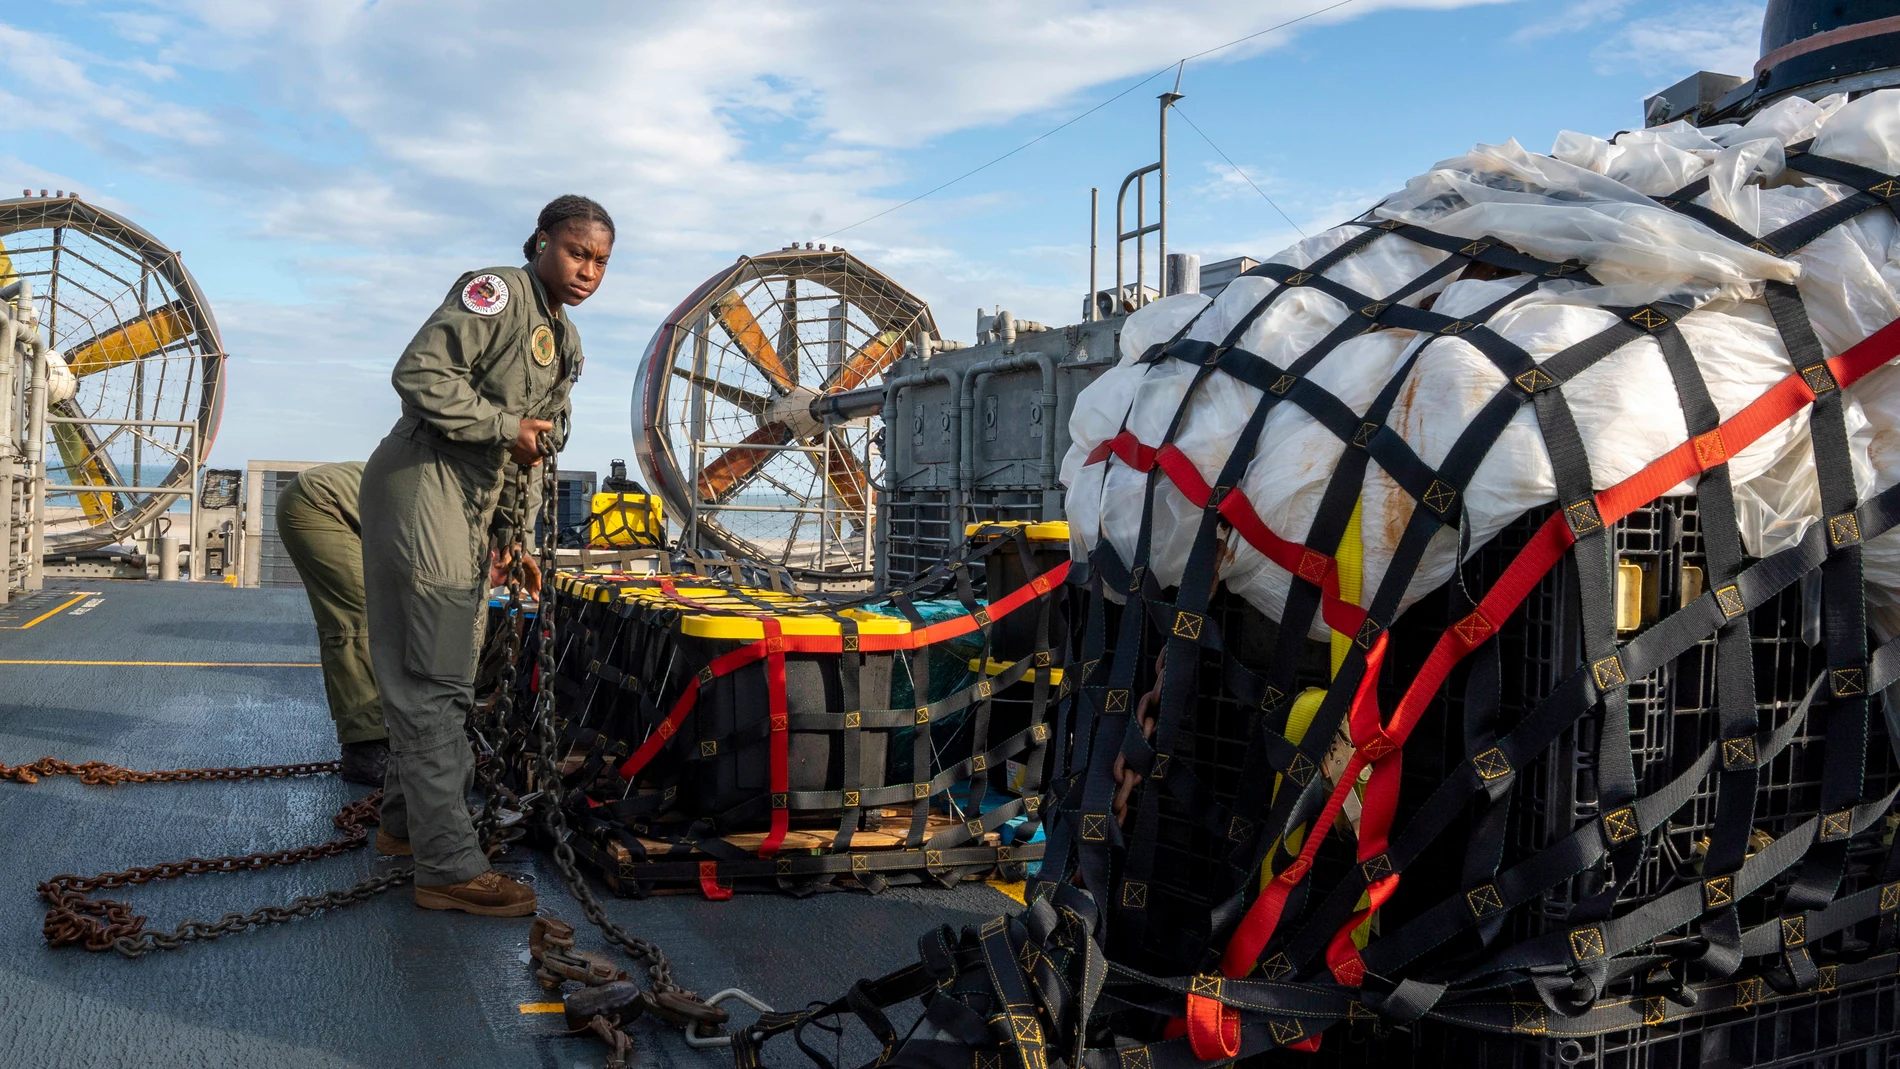 At Sea (United States), 10/02/2023.- A handout photo made available by the US Navy shows a sailor assigned to Assault Craft Unit 4 preparing material recovered in the Atlantic Ocean from a high-altitude balloon for transport to federal agents at Joint Expeditionary Base Little Creek, 10 February 2023 (issued 14 February 2023). At the direction of the President of the United States and with the full support of the Government of Canada, U.S. fighter aircraft under U.S. Northern Command authority engaged and brought down a high-altitude balloon within sovereign U.S. airspace and over U.S. territorial waters, according to the US Navy. (Estados Unidos) EFE/EPA/U.S. Navy/Mass Communication Specialist 1st Class Ryan Seelbach HANDOUT EDITORIAL USE ONLY/NO SALES 